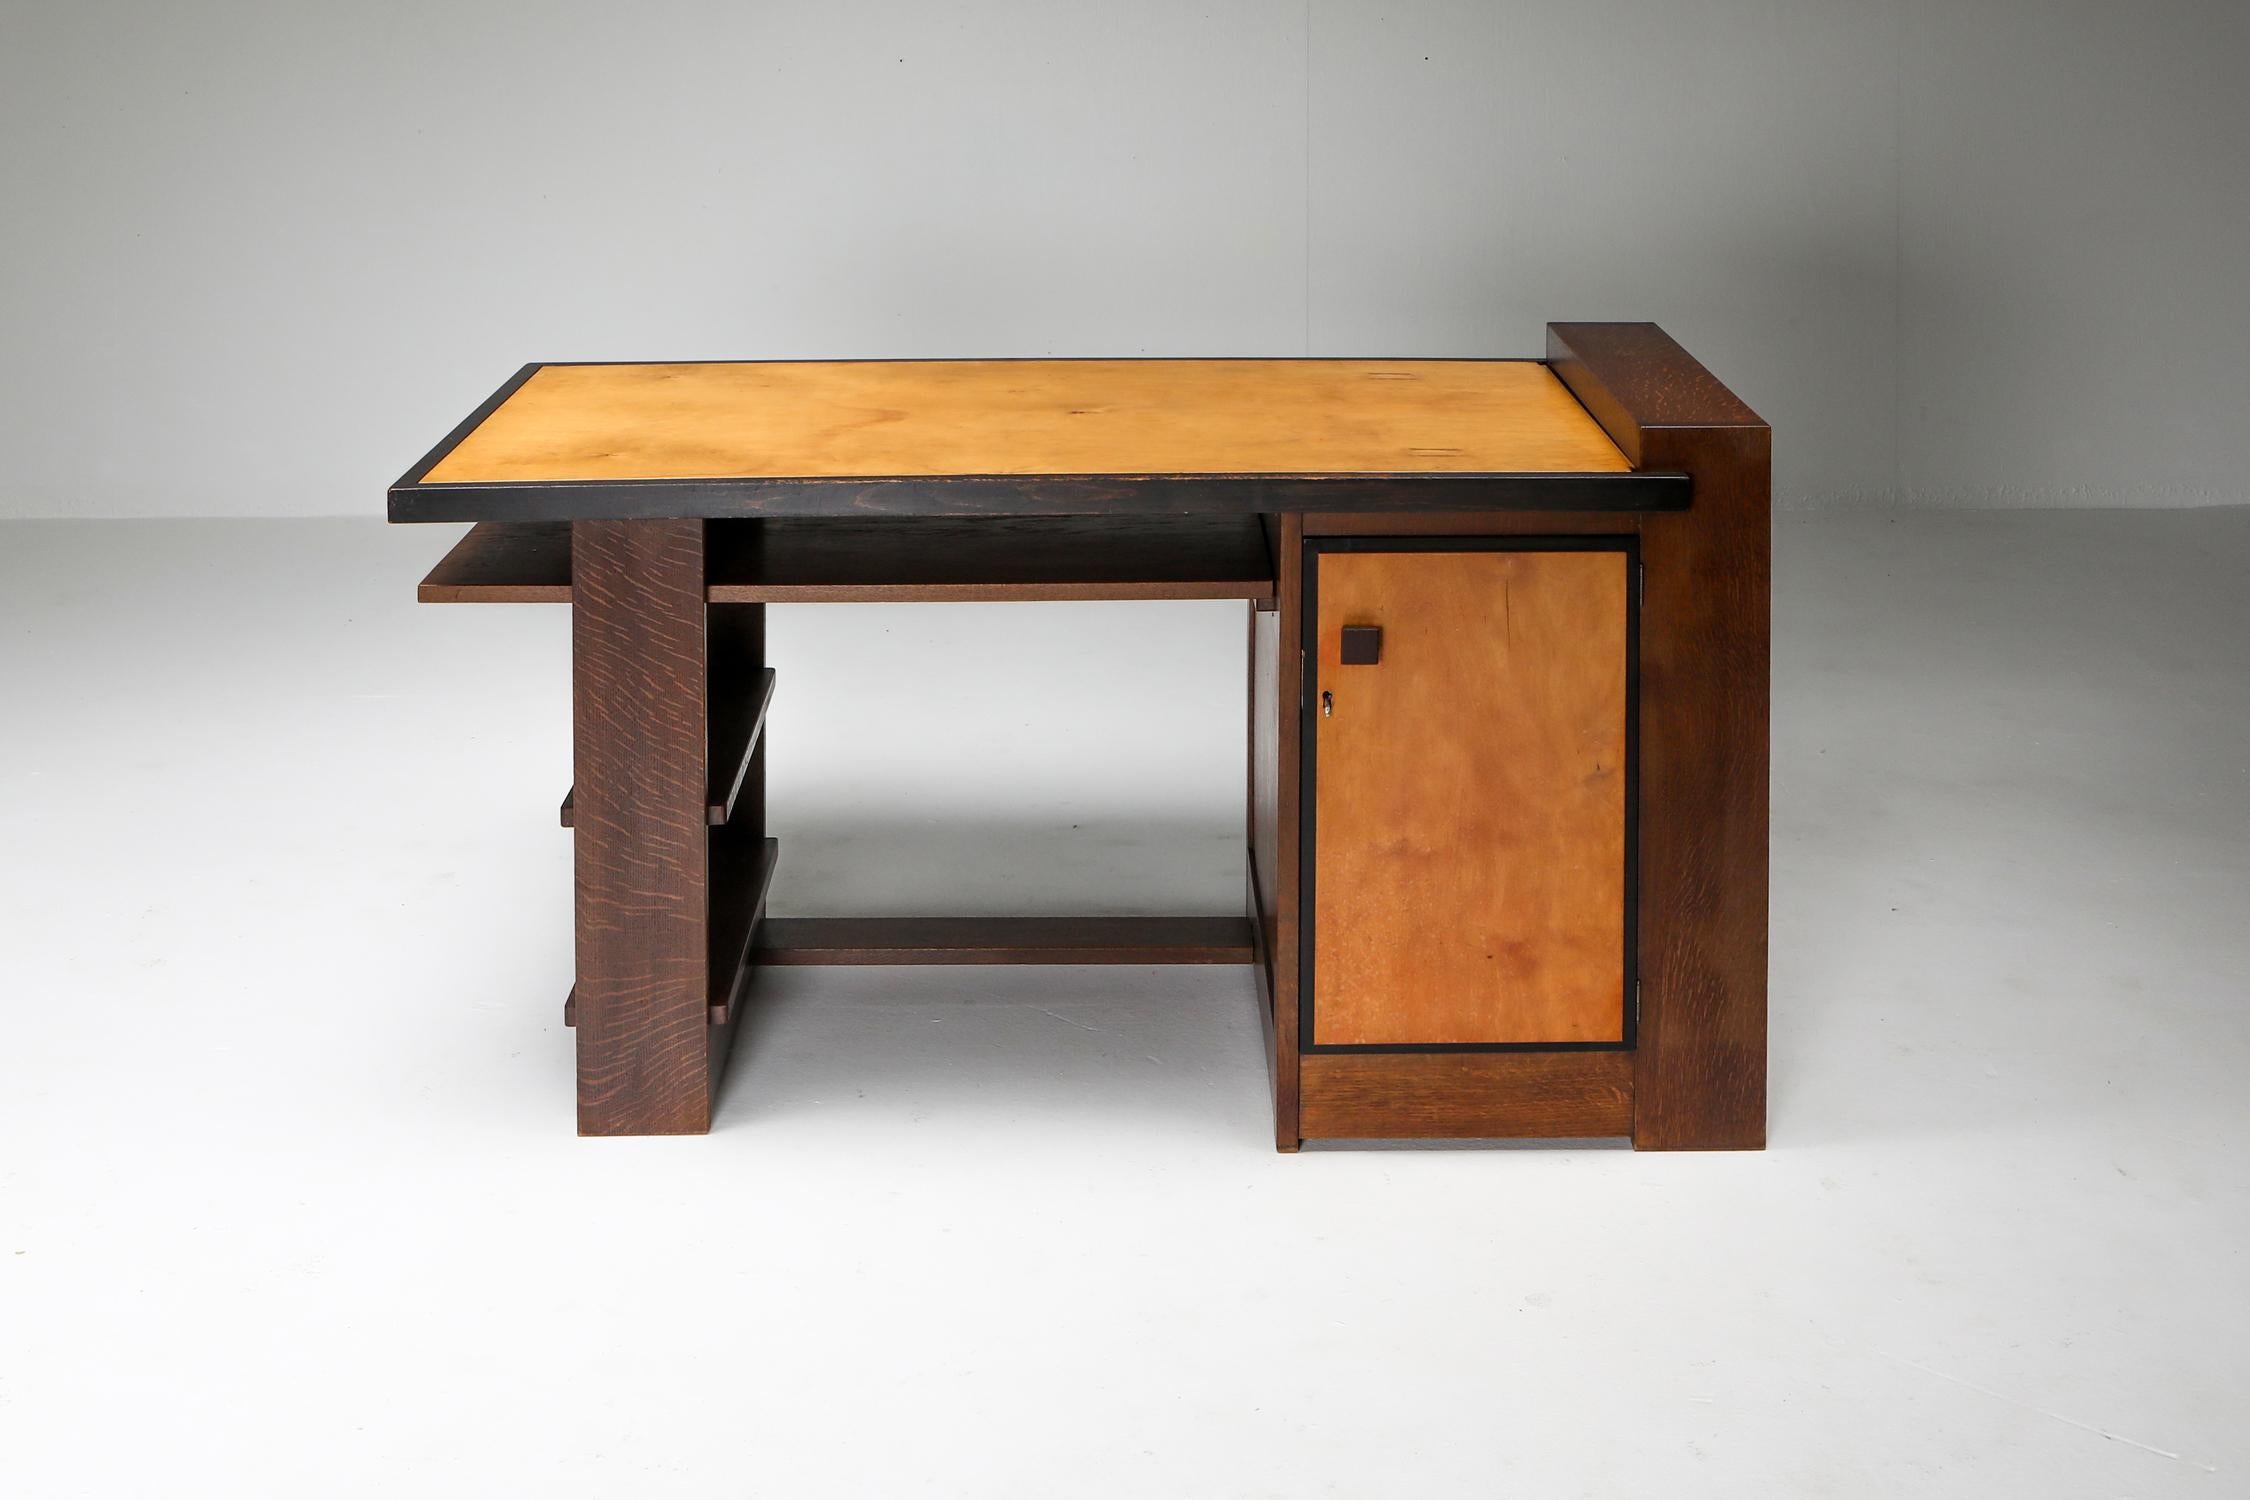 Modernist desk, Frits Spanjaard, Netherlands, ca 1930

Frits Spanjaard, influenced by Hendrik Wouda, designed balanced and simple pieces of furniture. His unique abstract style and refined use of composition, set him apart from other rationalist